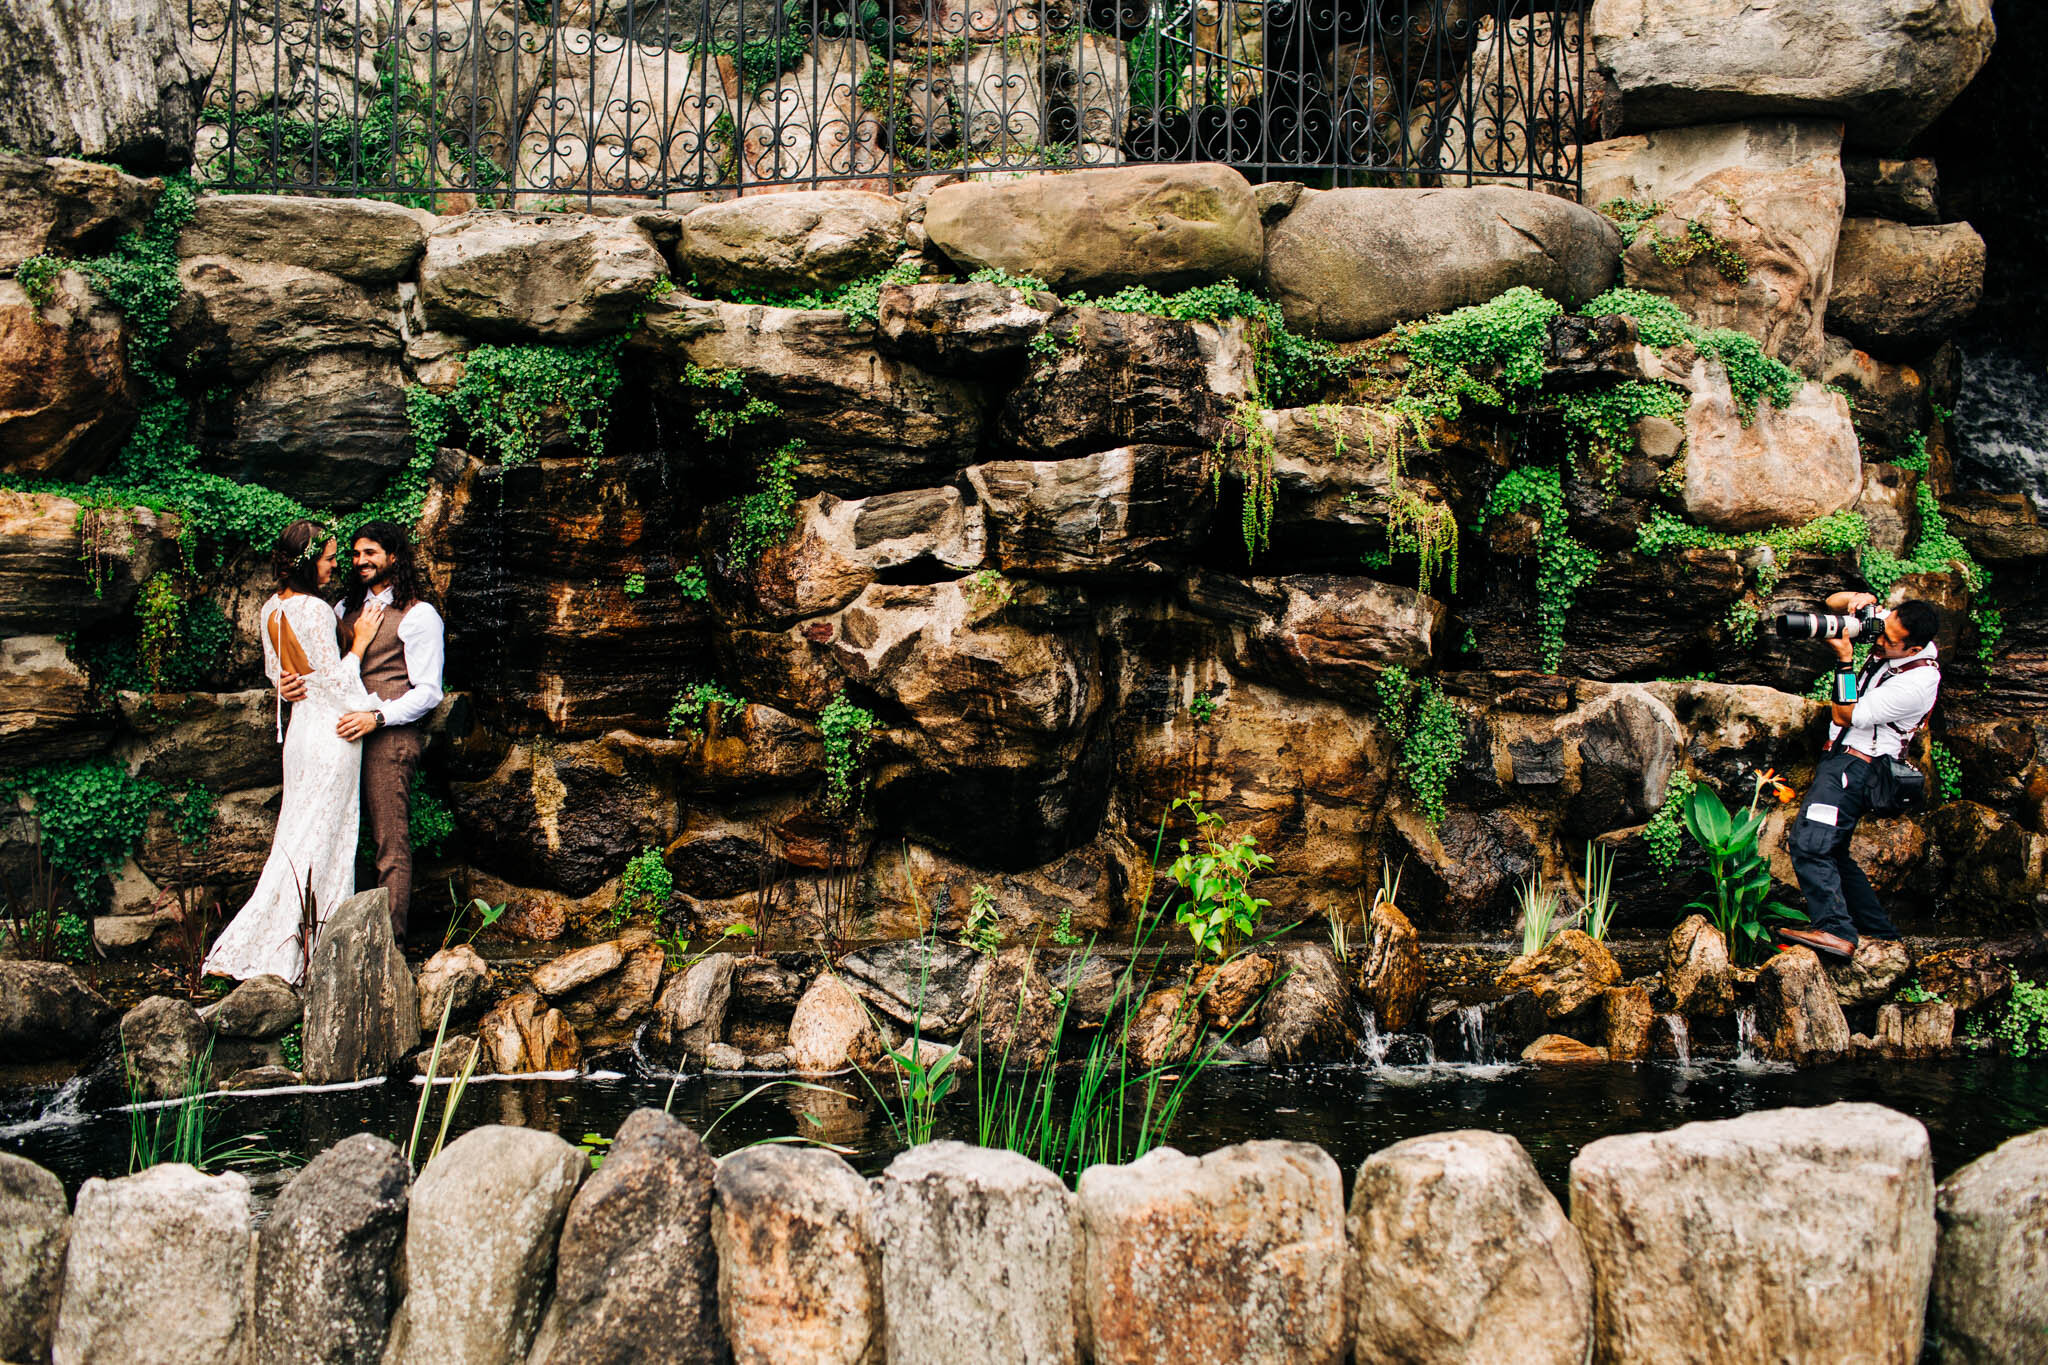 017-ROCKSTEADY IMAGES [Allie+Mike Wedding (Squarespace)]-ROQ20450.jpg